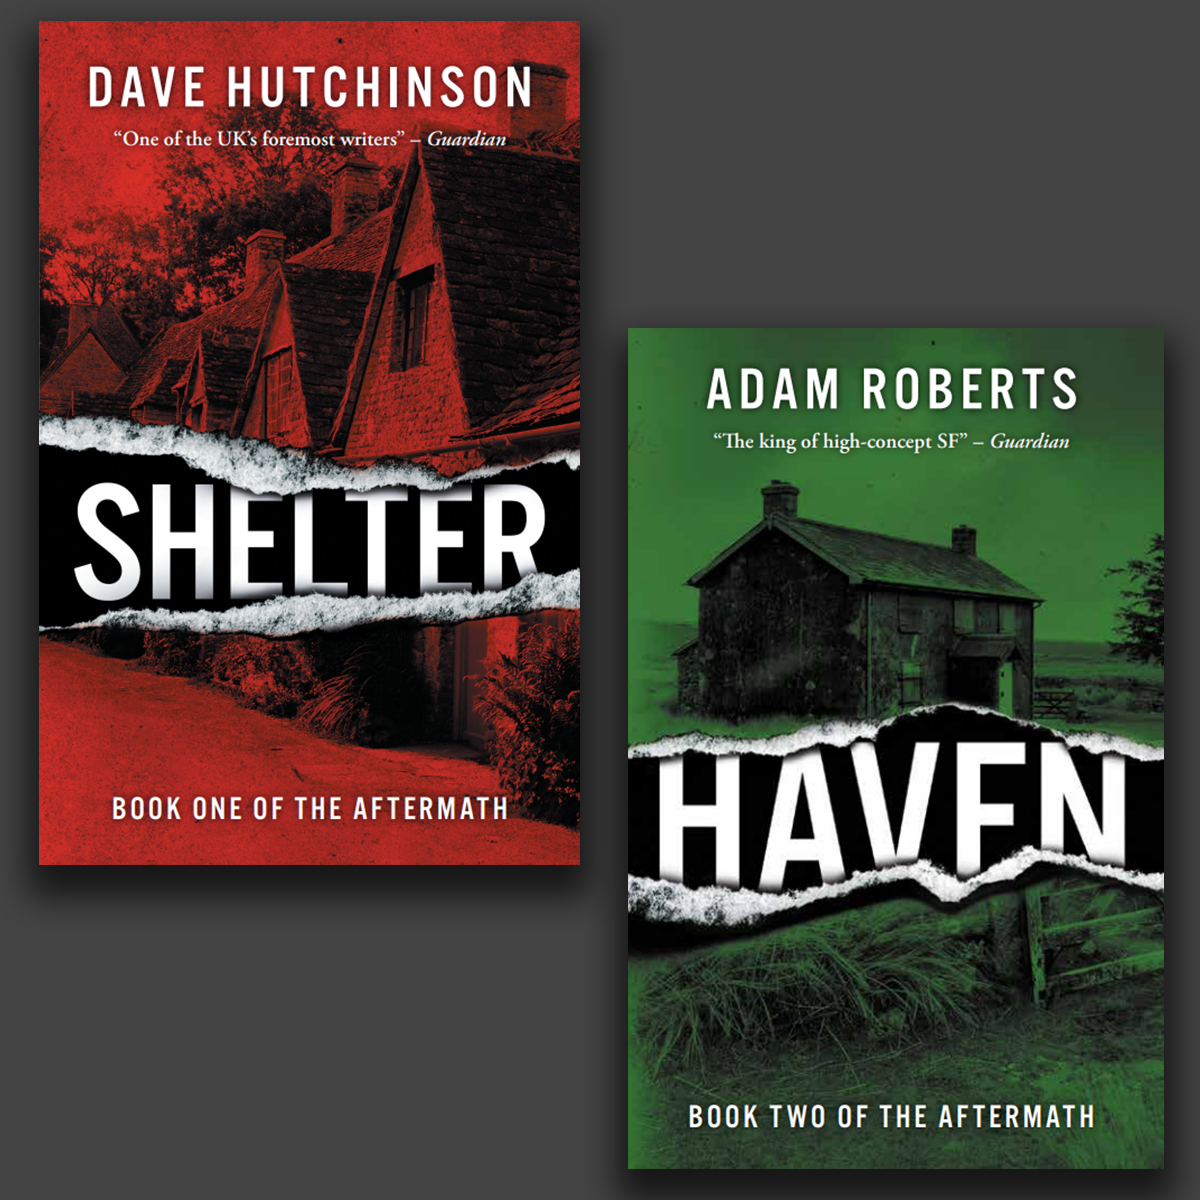 Cover Reveal: Shelter by Dave Hutchinson and Haven by Adam Roberts!